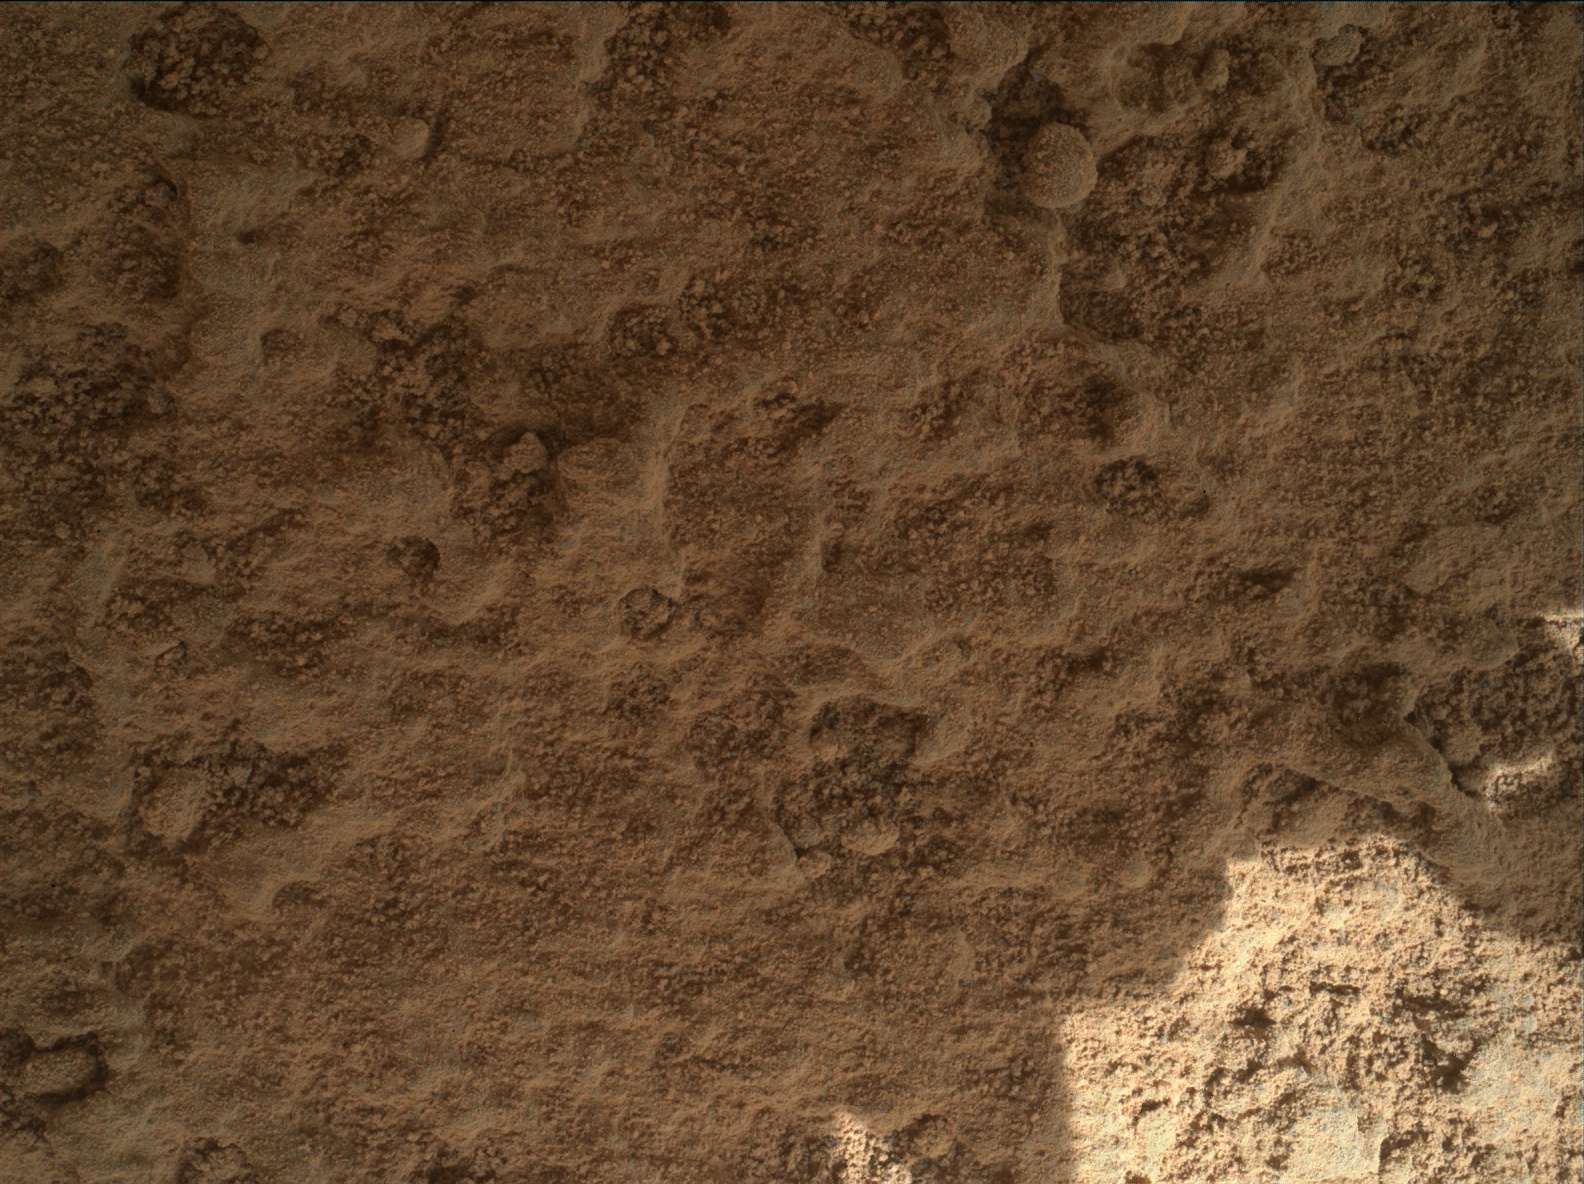 Nasa's Mars rover Curiosity acquired this image using its Mars Hand Lens Imager (MAHLI) on Sol 537